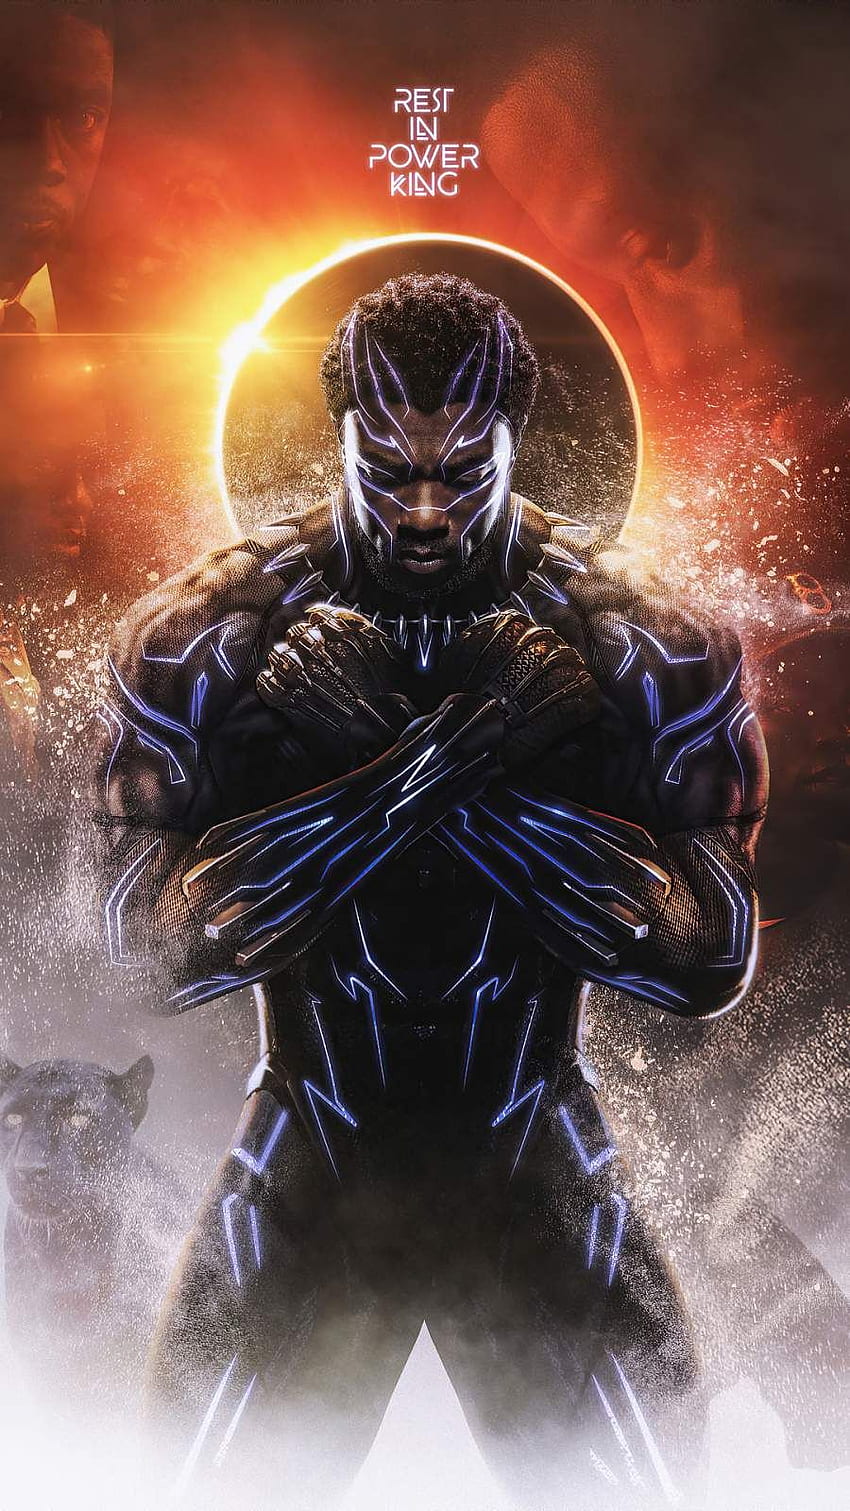 iPhone for iPhone 12, iPhone 11, iPhone X, iPhone XR, iPhone 8 Plus High Quality Wal. Black panther marvel, Black panther art, Marvel superhero posters, Marvel Films HD phone wallpaper